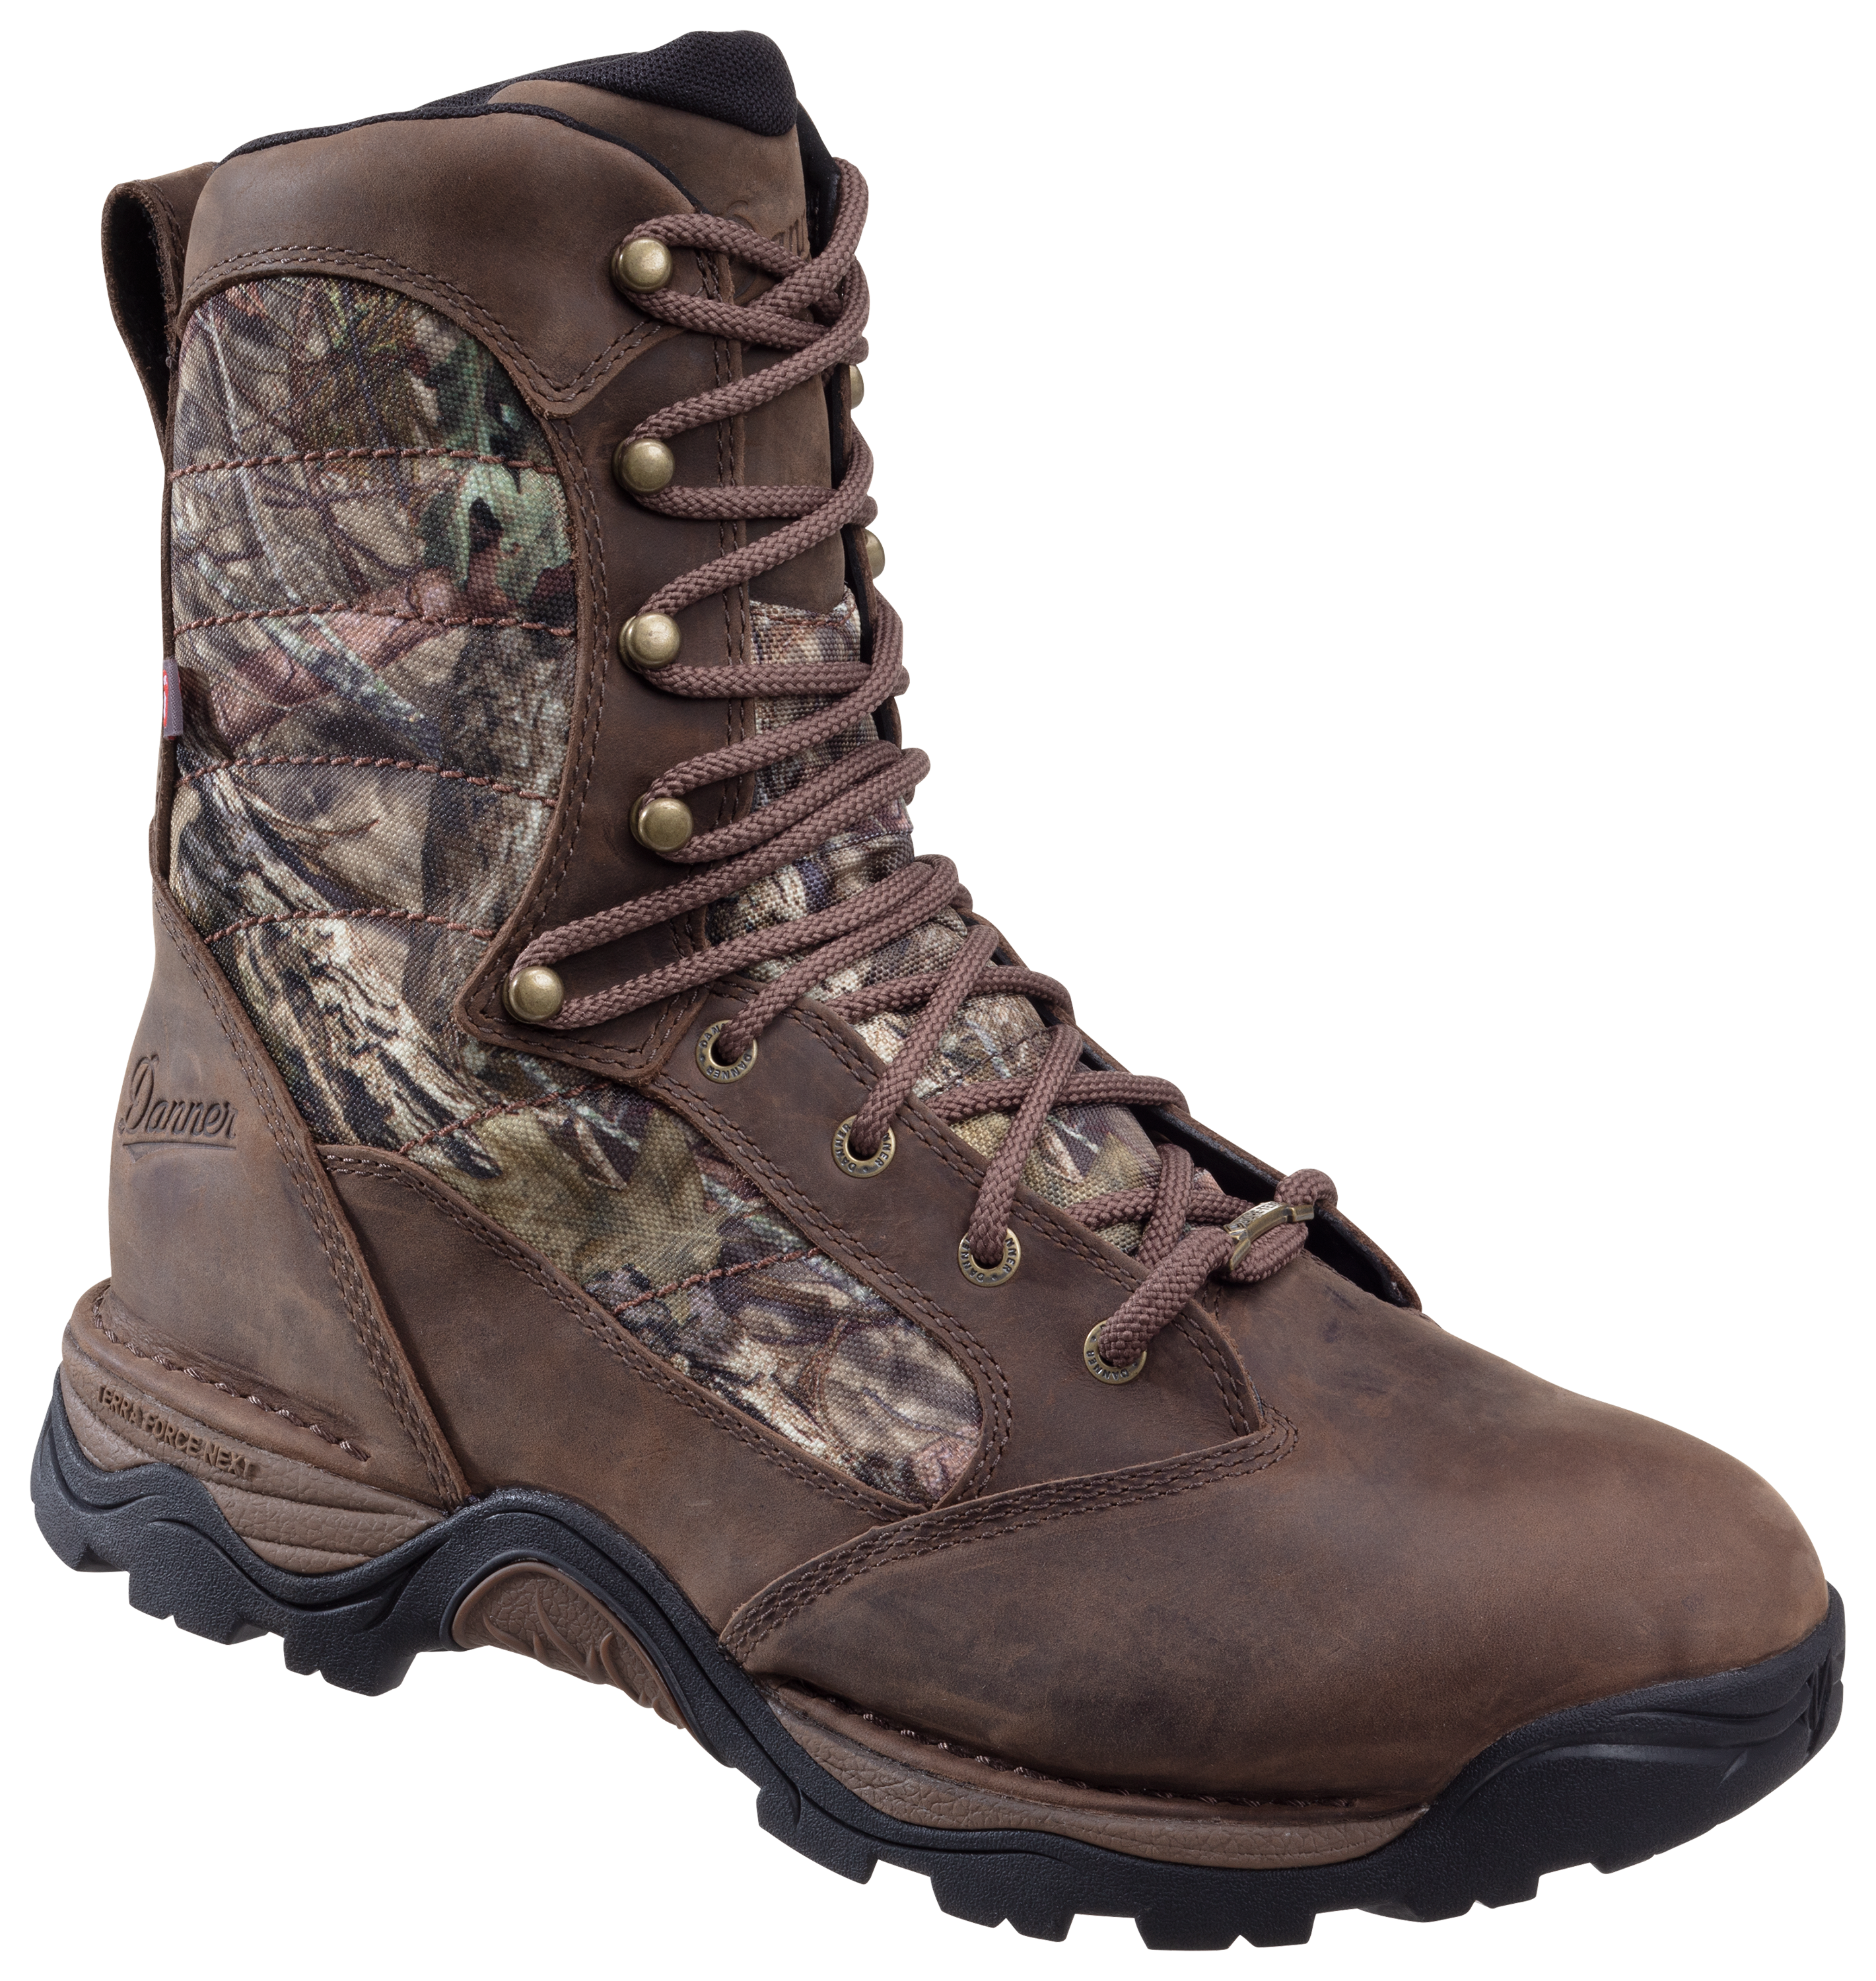 Danner Pronghorn 800 Insulated GORE-TEX Hunting Boots for Men - Mossy Oak Break-Up Country - 8M